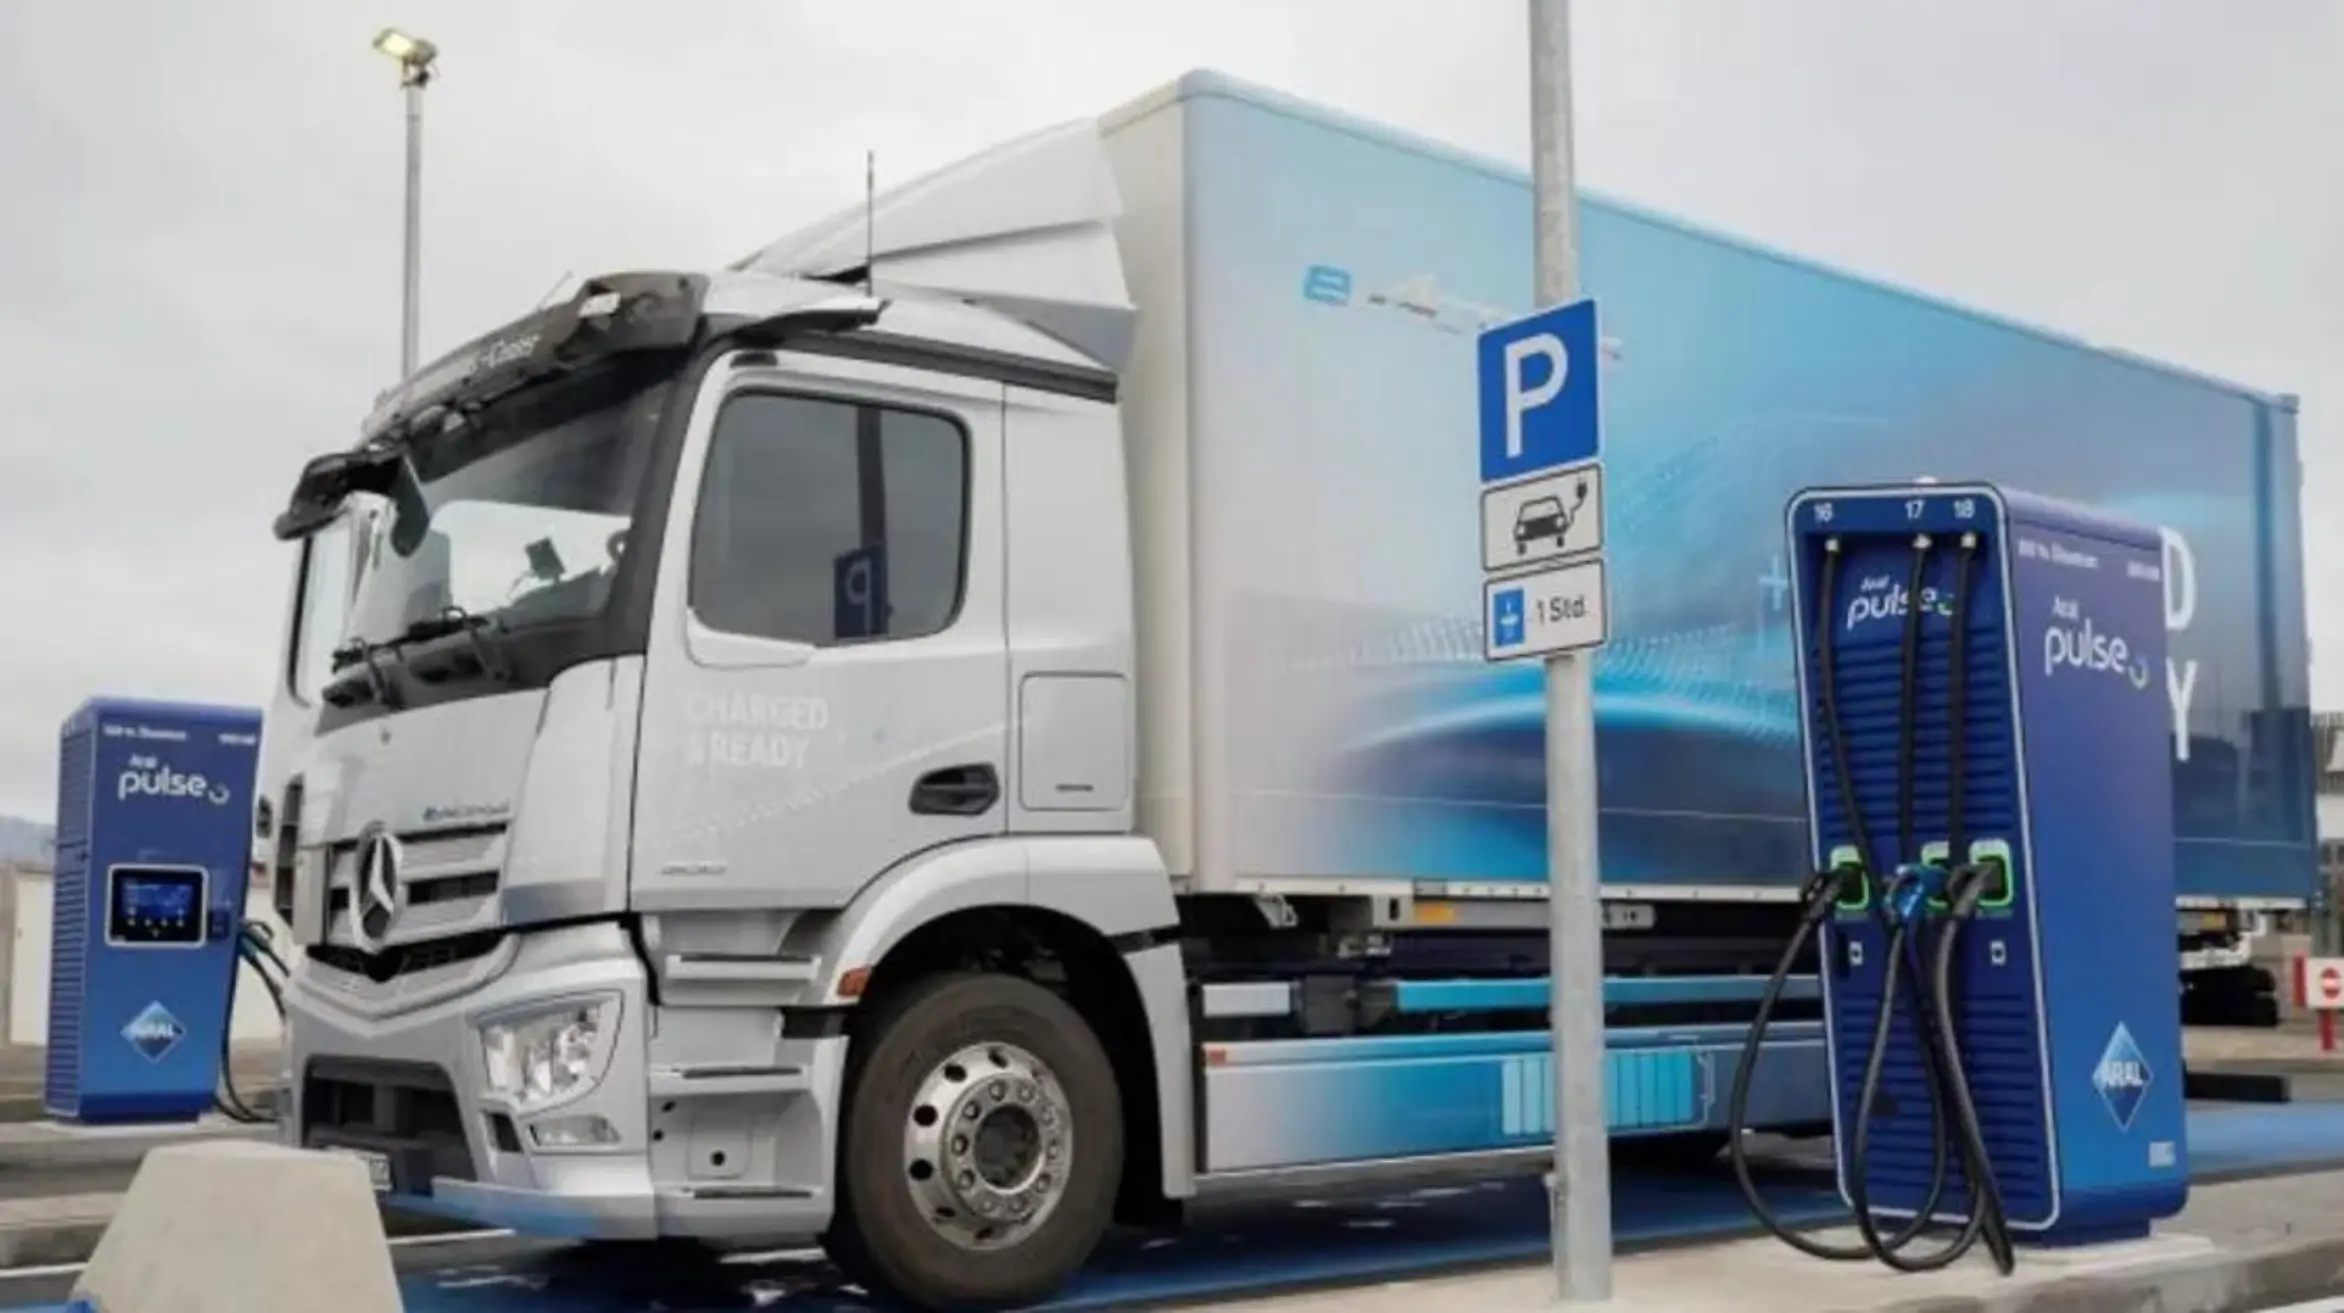 Belgium's E-Truck Charging Network Expansion